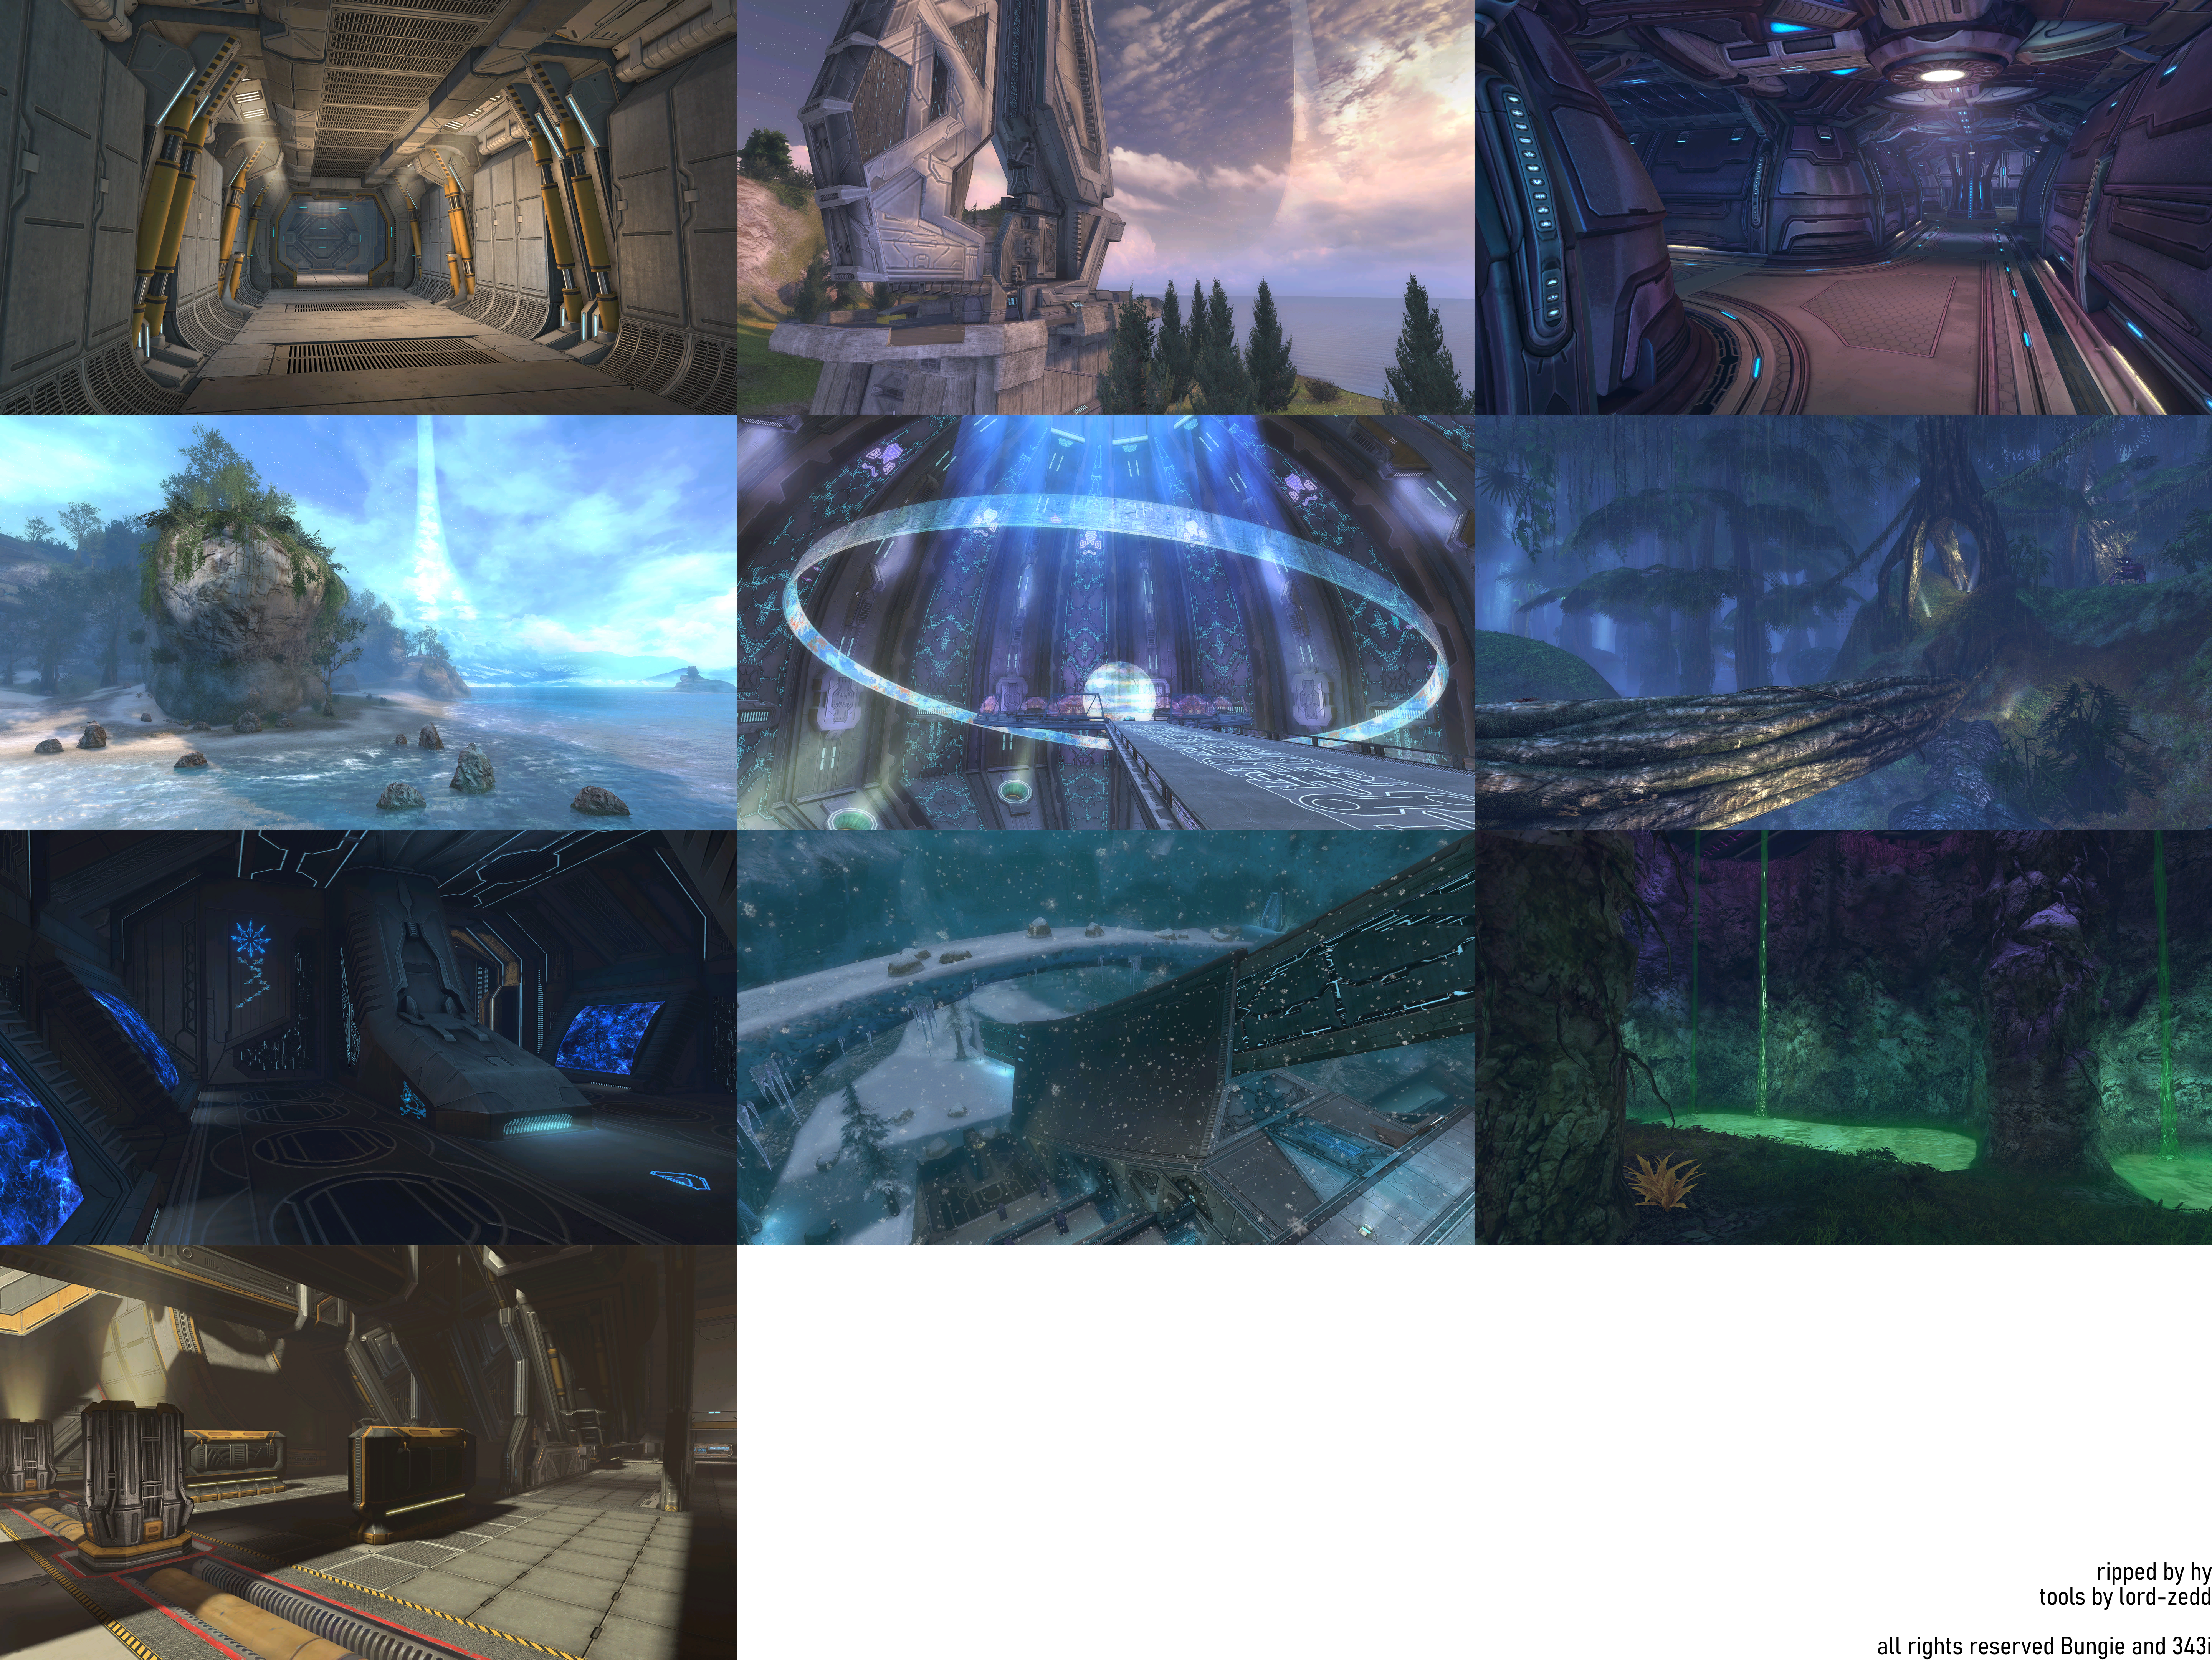 Halo: The Master Chief Collection - Halo CE Campaign Level Loading Screens